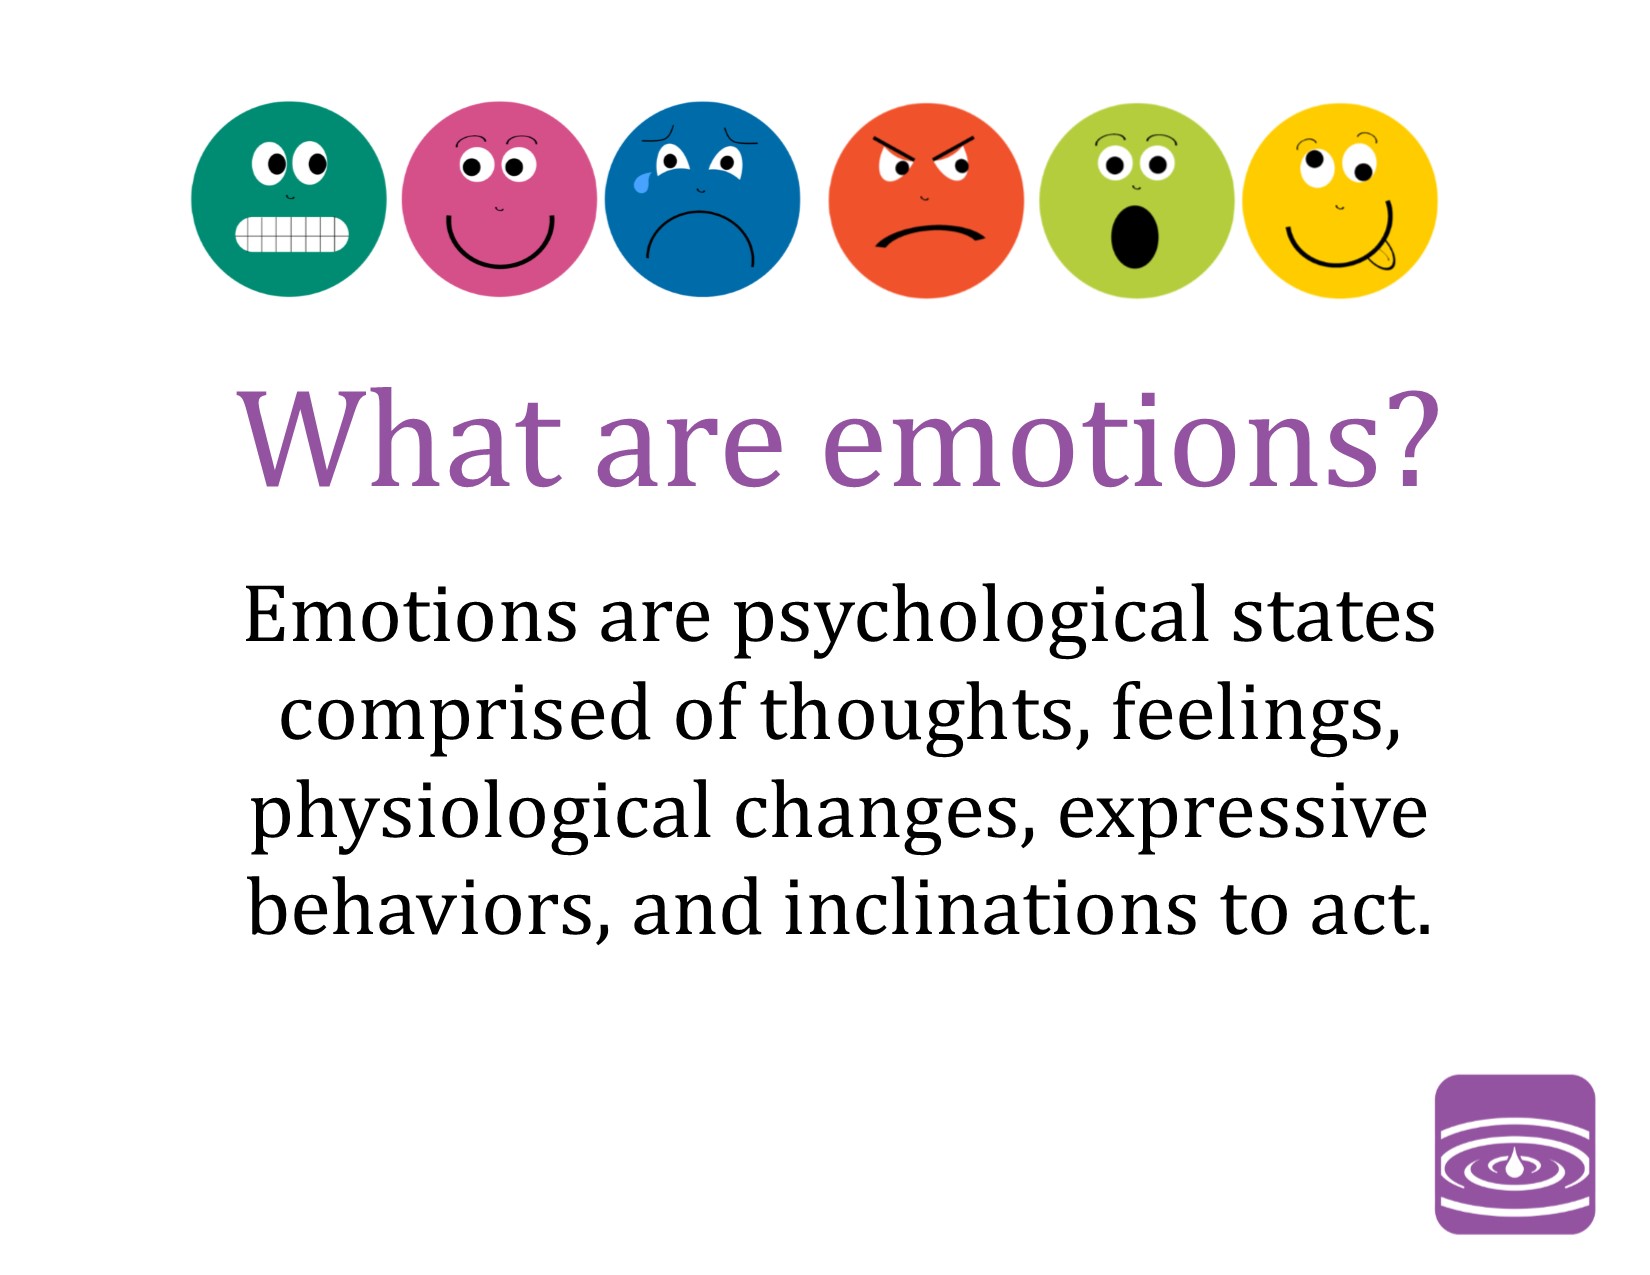 http://www.familymeans.org/assets_site/images/blog/what%20are%20emotions.jpg